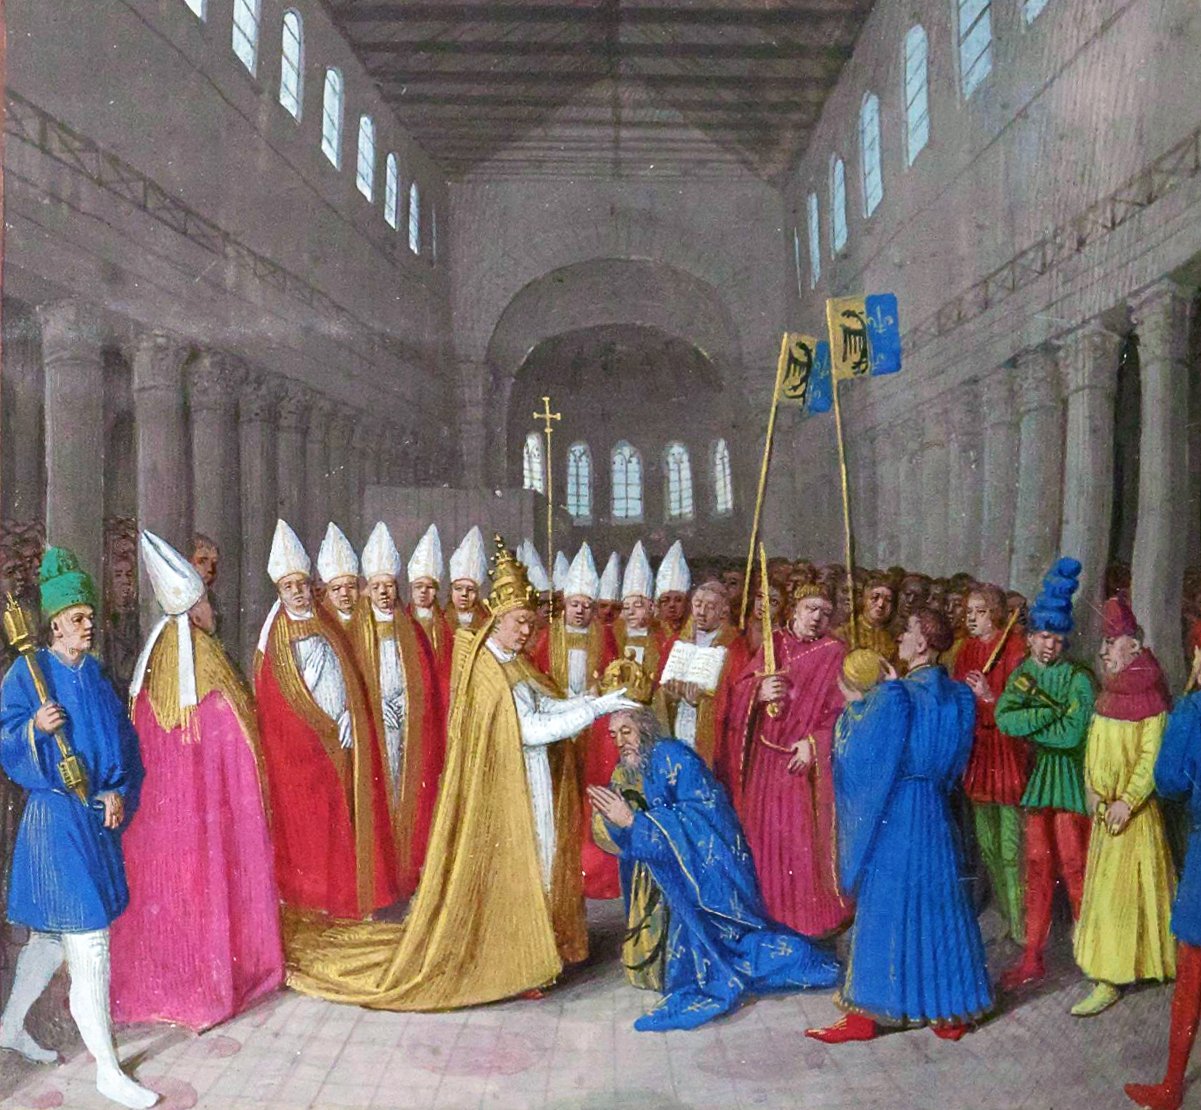 A medieval painting of Charlemagne being crowned emperor by Pope Leo III in a large hall filled with people. The painting shows Charlemagne kneeling in the center of the hall, wearing a blue cloak. He is receiving a blessing and a crown from Pope Leo III, who is standing in front of him, wearing a white robe and a golden cape. Around them, there are many people dressed in colorful robes and white hats, some holding banners and flags. The colors in the painting are mostly blue, red, and gold, creating a contrast between the light and dark areas. The painting is in a realistic style with a lot of detail and perspective.